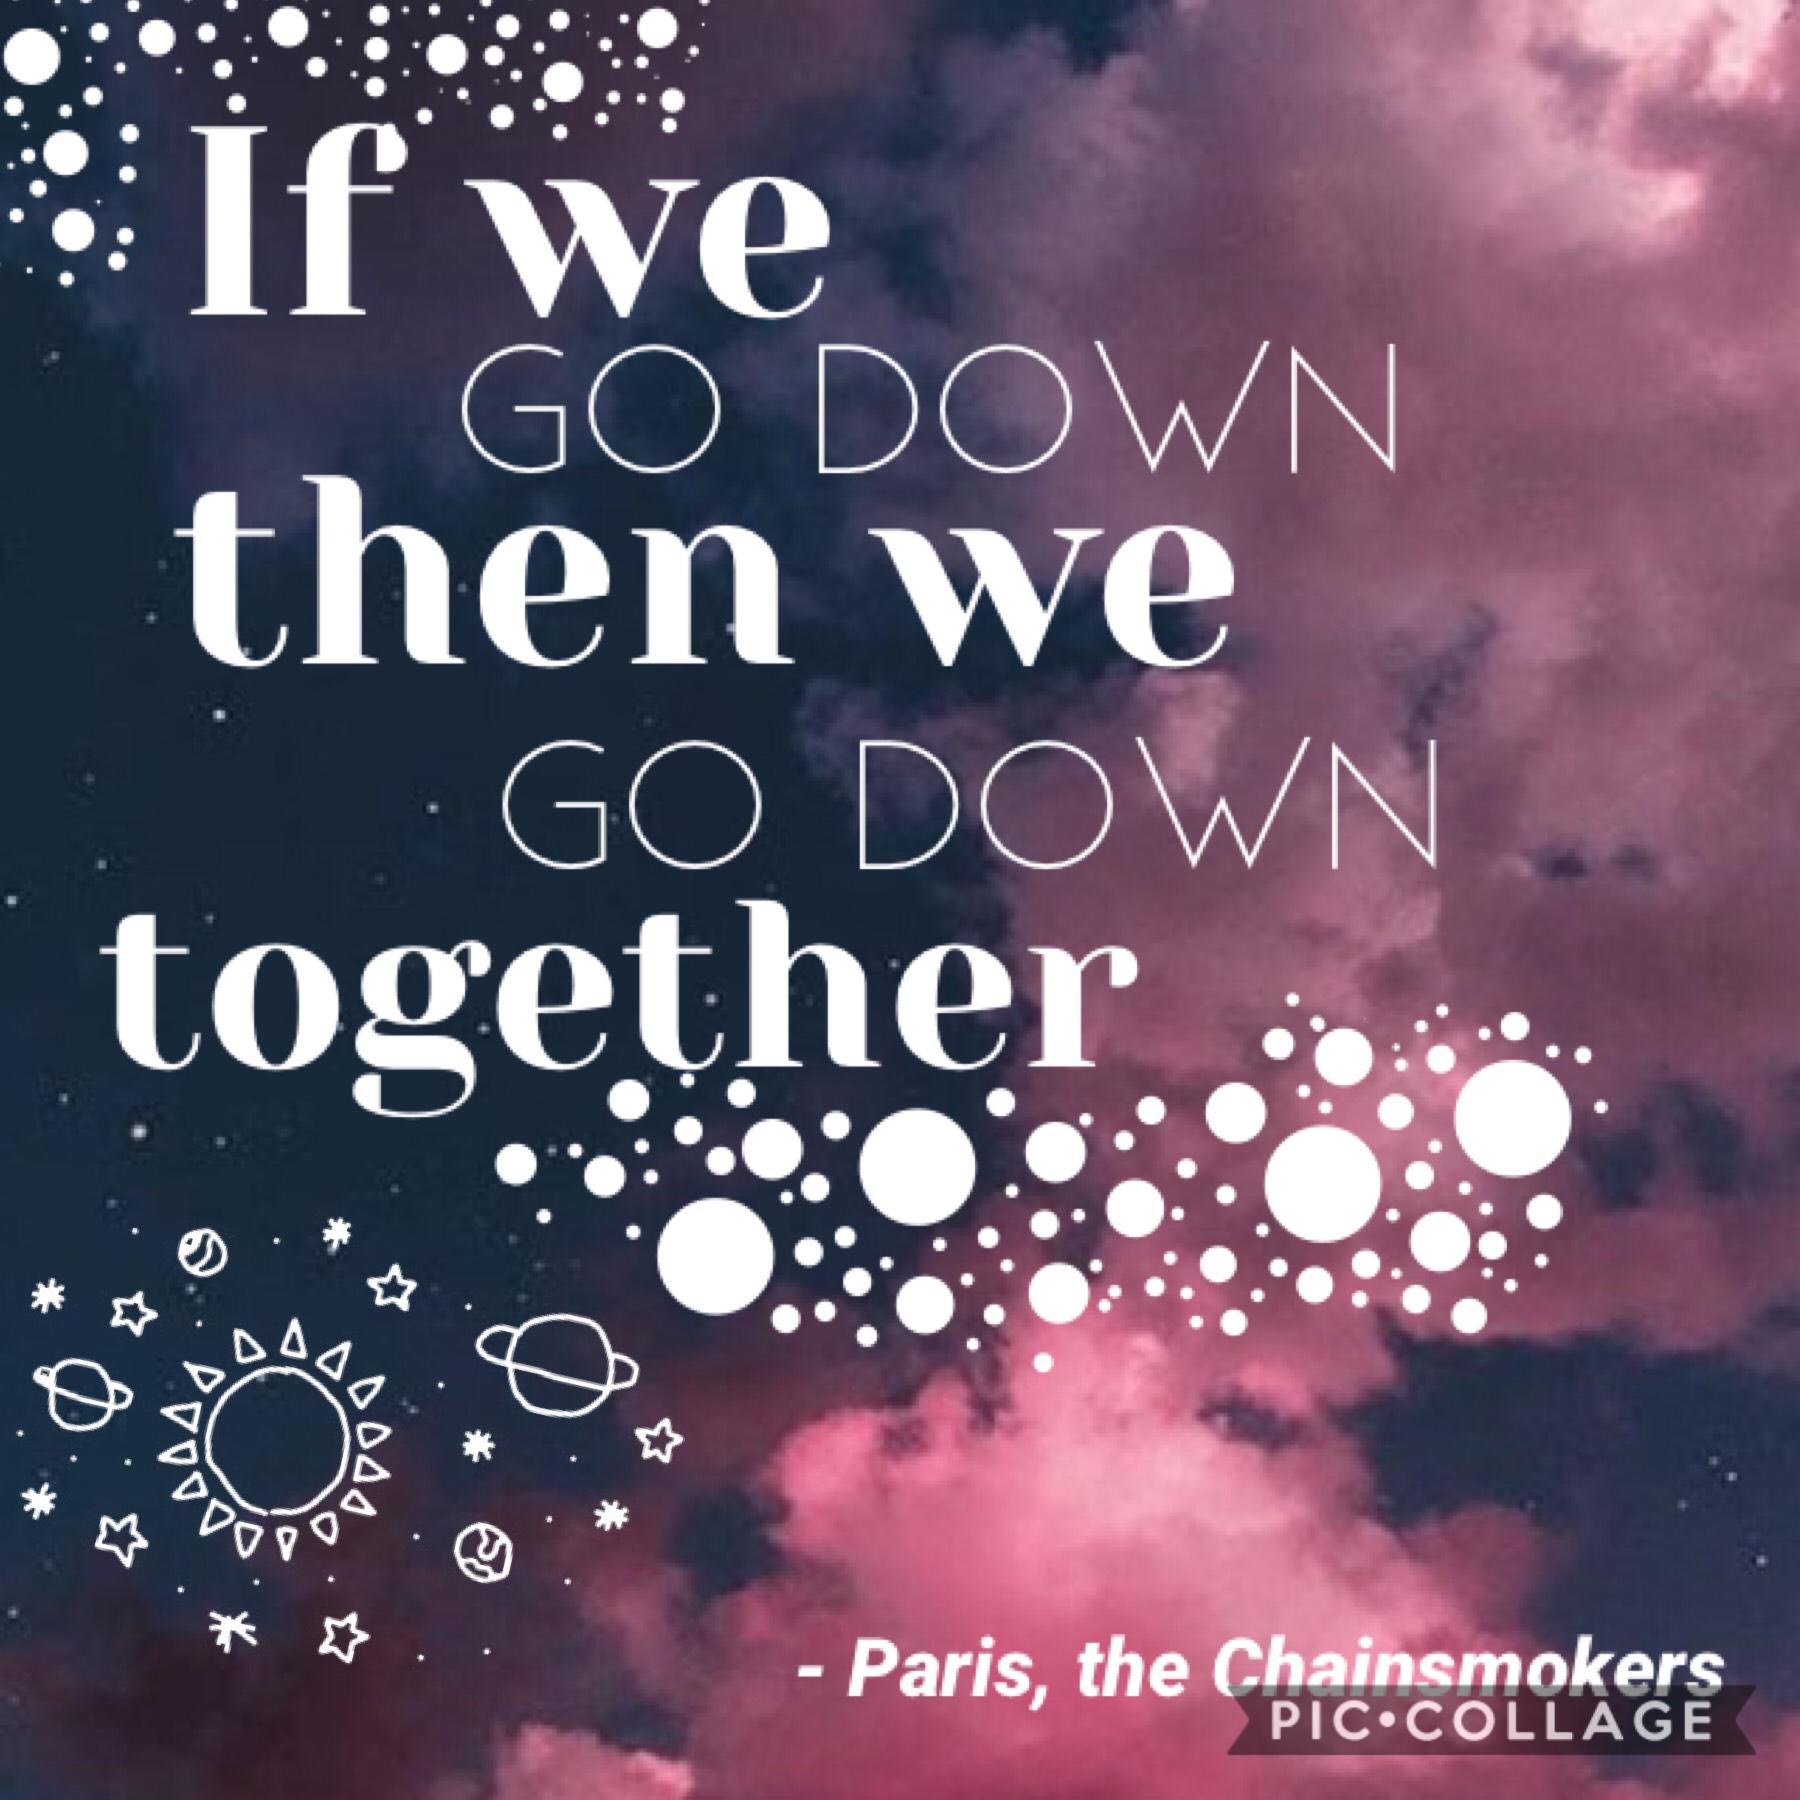 🎆If we go down, then we go down together🎆